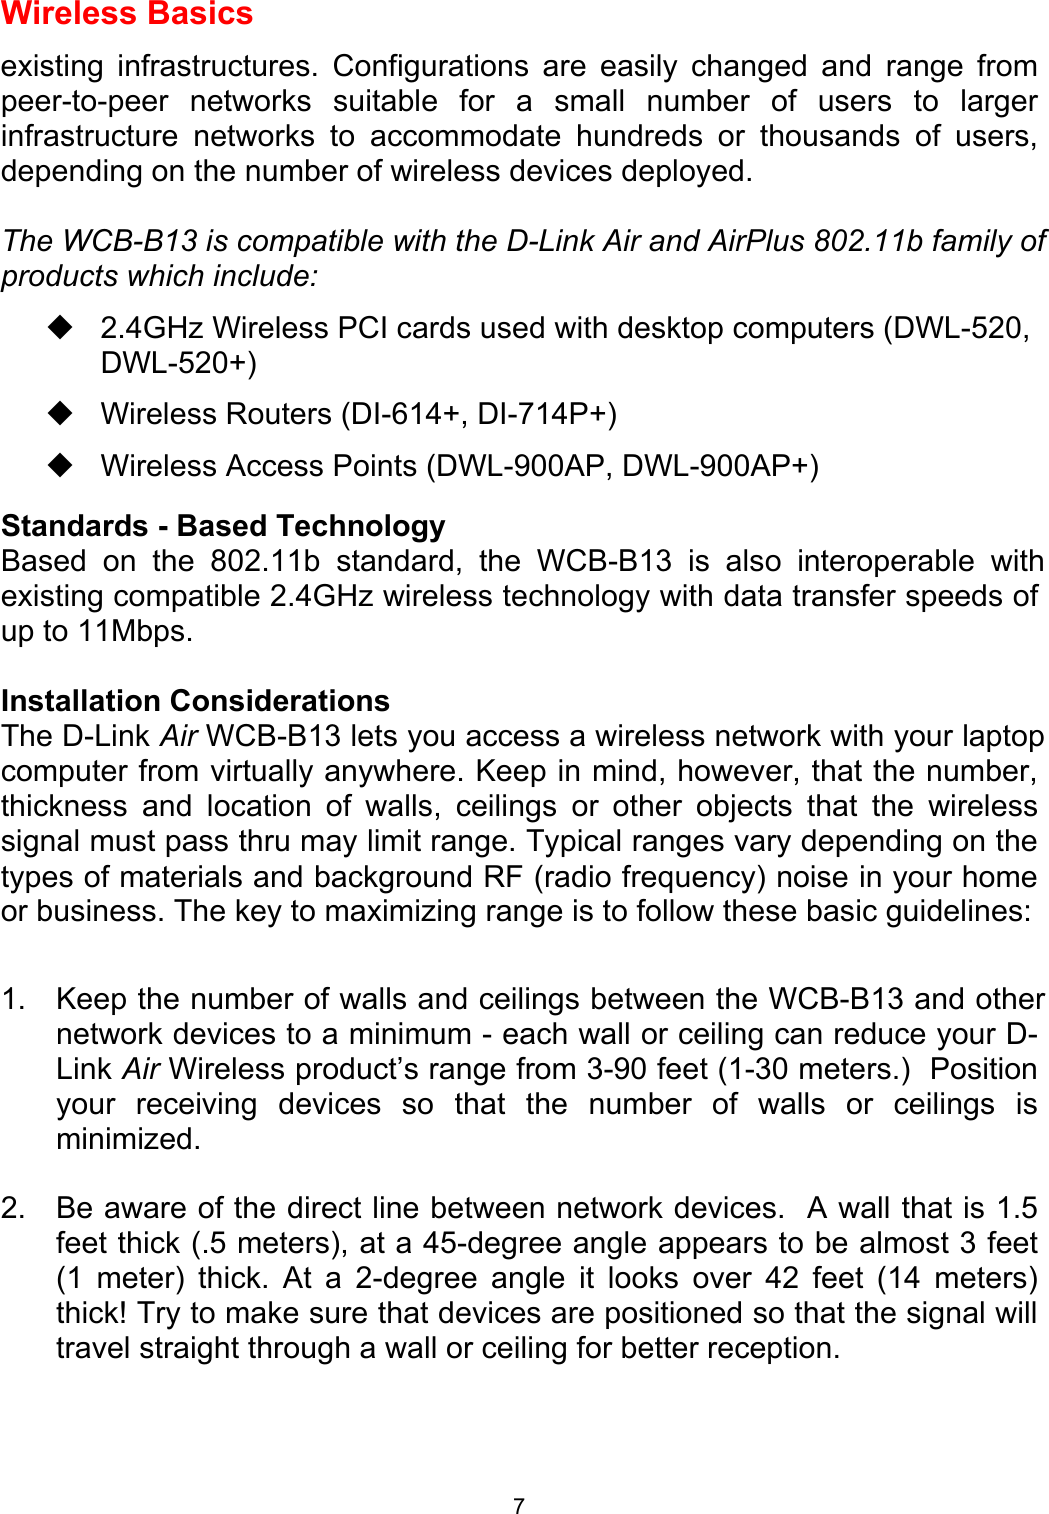  7Wireless Basics existing infrastructures. Configurations are easily changed and range from peer-to-peer networks suitable for a small number of users to larger infrastructure networks to accommodate hundreds or thousands of users, depending on the number of wireless devices deployed.  The WCB-B13 is compatible with the D-Link Air and AirPlus 802.11b family of products which include:  2.4GHz Wireless PCI cards used with desktop computers (DWL-520, DWL-520+)  Wireless Routers (DI-614+, DI-714P+)  Wireless Access Points (DWL-900AP, DWL-900AP+) Standards - Based Technology Based on the 802.11b standard, the WCB-B13 is also interoperable with existing compatible 2.4GHz wireless technology with data transfer speeds of up to 11Mbps.  Installation Considerations The D-Link Air WCB-B13 lets you access a wireless network with your laptop computer from virtually anywhere. Keep in mind, however, that the number, thickness and location of walls, ceilings or other objects that the wireless signal must pass thru may limit range. Typical ranges vary depending on the types of materials and background RF (radio frequency) noise in your home or business. The key to maximizing range is to follow these basic guidelines:  1. Keep the number of walls and ceilings between the WCB-B13 and other network devices to a minimum - each wall or ceiling can reduce your D-Link Air Wireless product’s range from 3-90 feet (1-30 meters.)  Position your receiving devices so that the number of walls or ceilings is minimized. 2.  Be aware of the direct line between network devices.  A wall that is 1.5 feet thick (.5 meters), at a 45-degree angle appears to be almost 3 feet (1 meter) thick. At a 2-degree angle it looks over 42 feet (14 meters) thick! Try to make sure that devices are positioned so that the signal will travel straight through a wall or ceiling for better reception.  